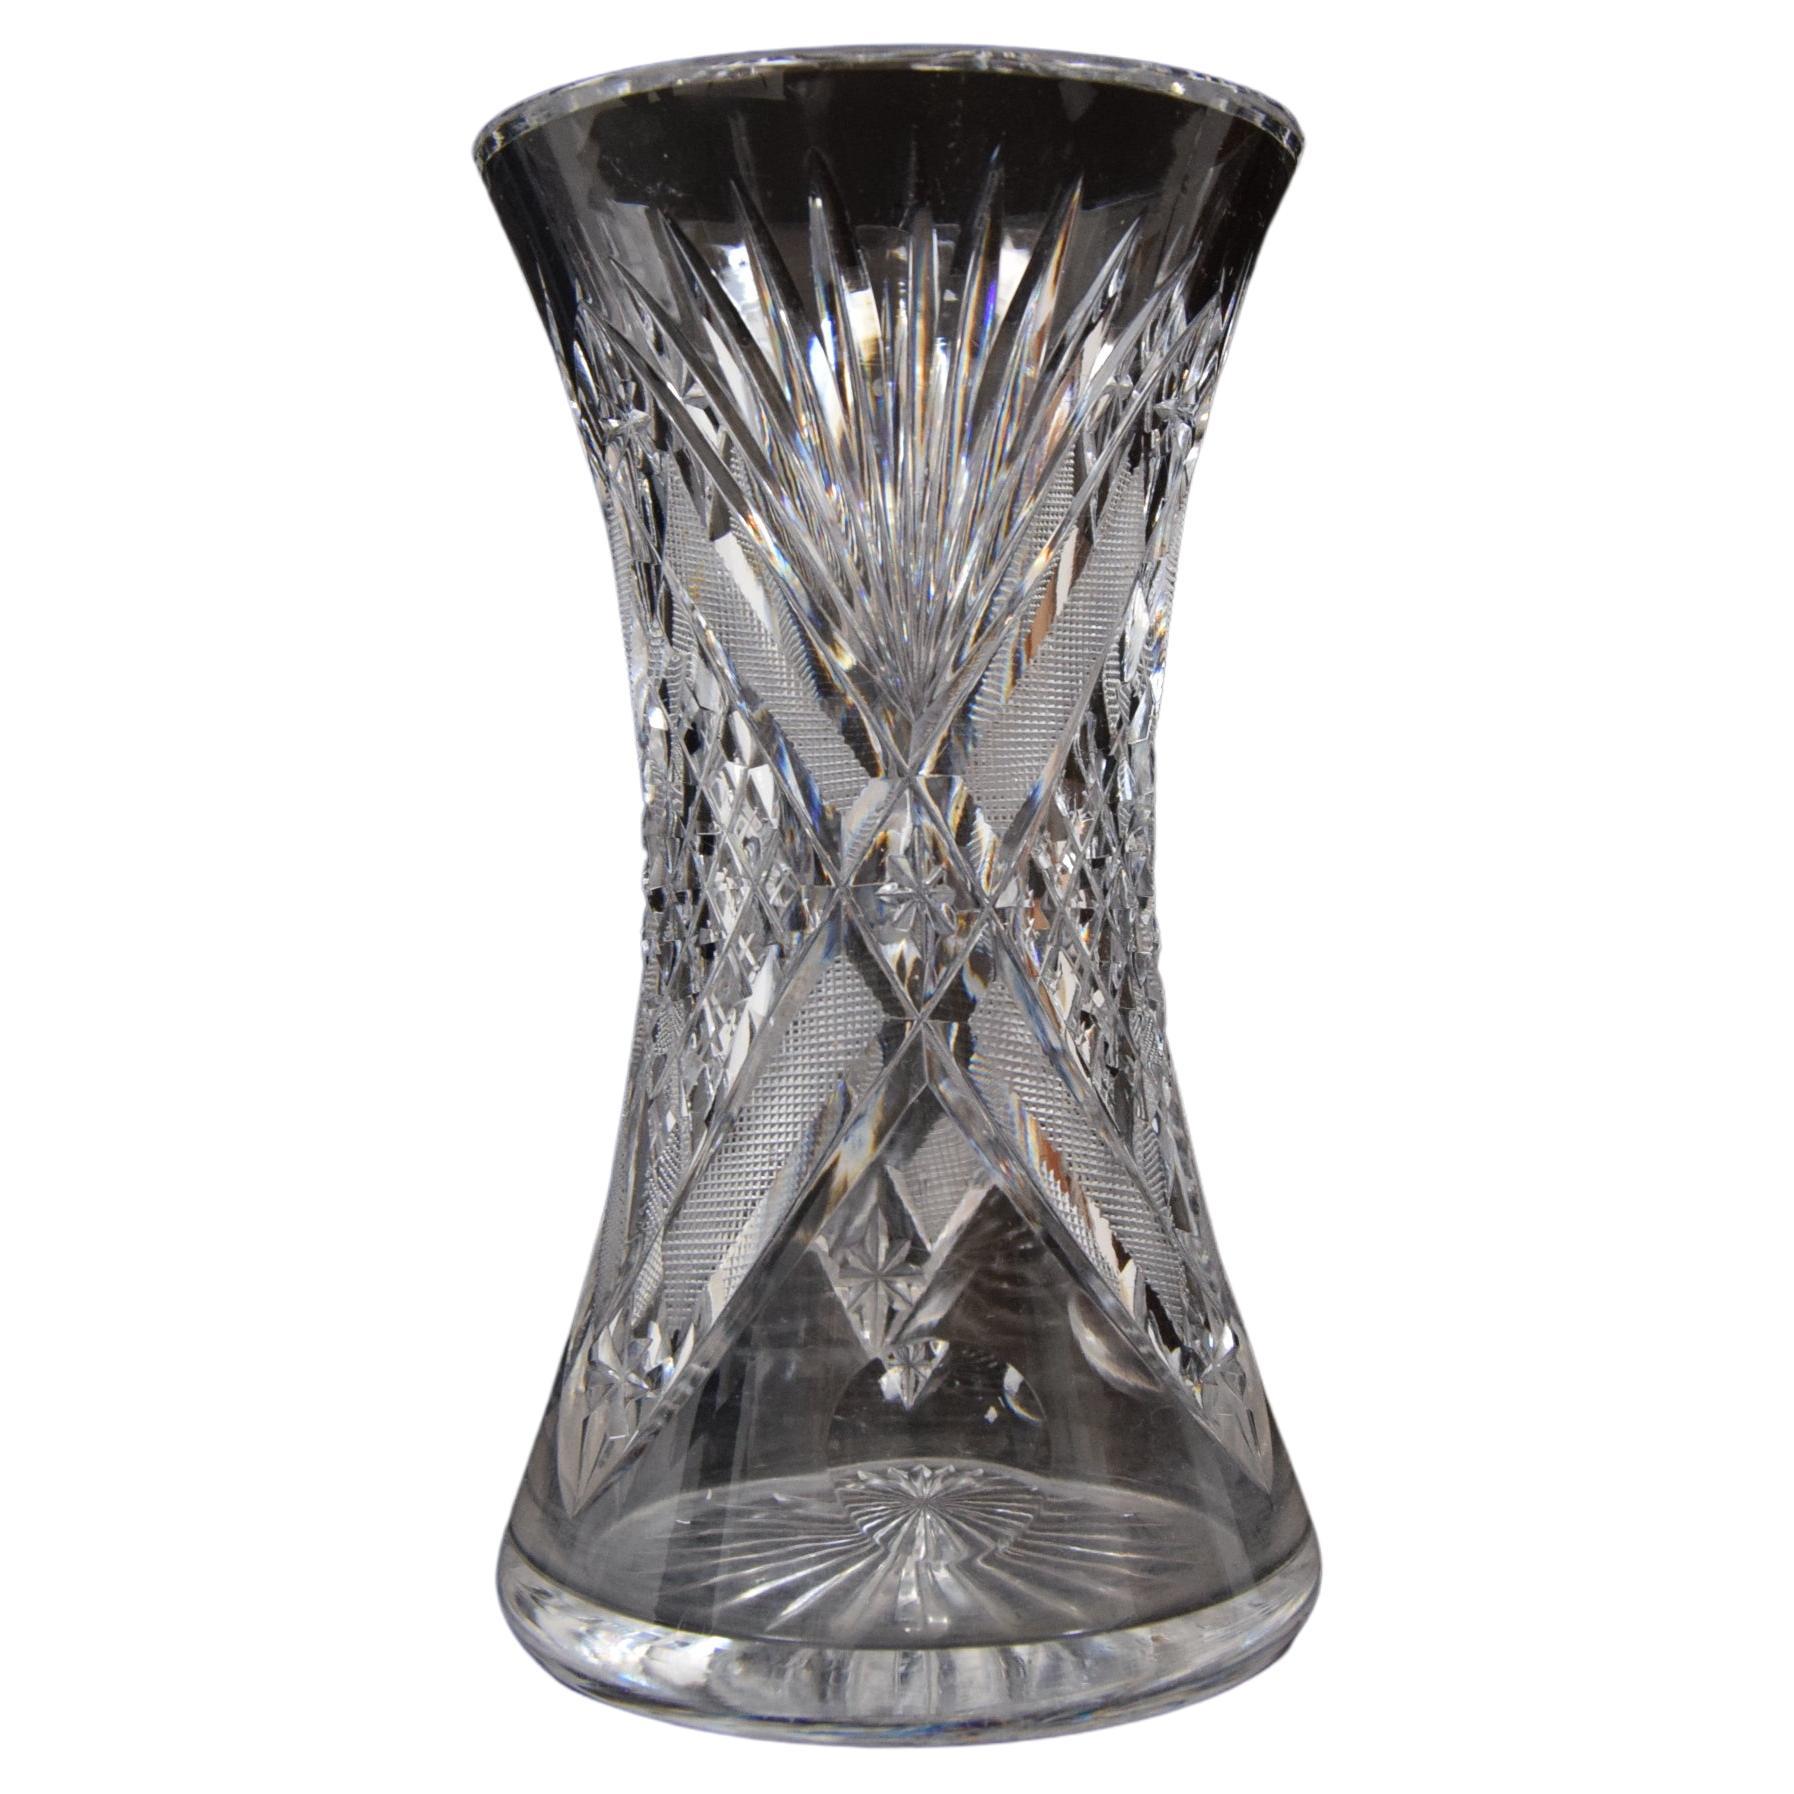 Rare Vintage Vase, Cut Crystal Glass, Bohemia in the, 1960s